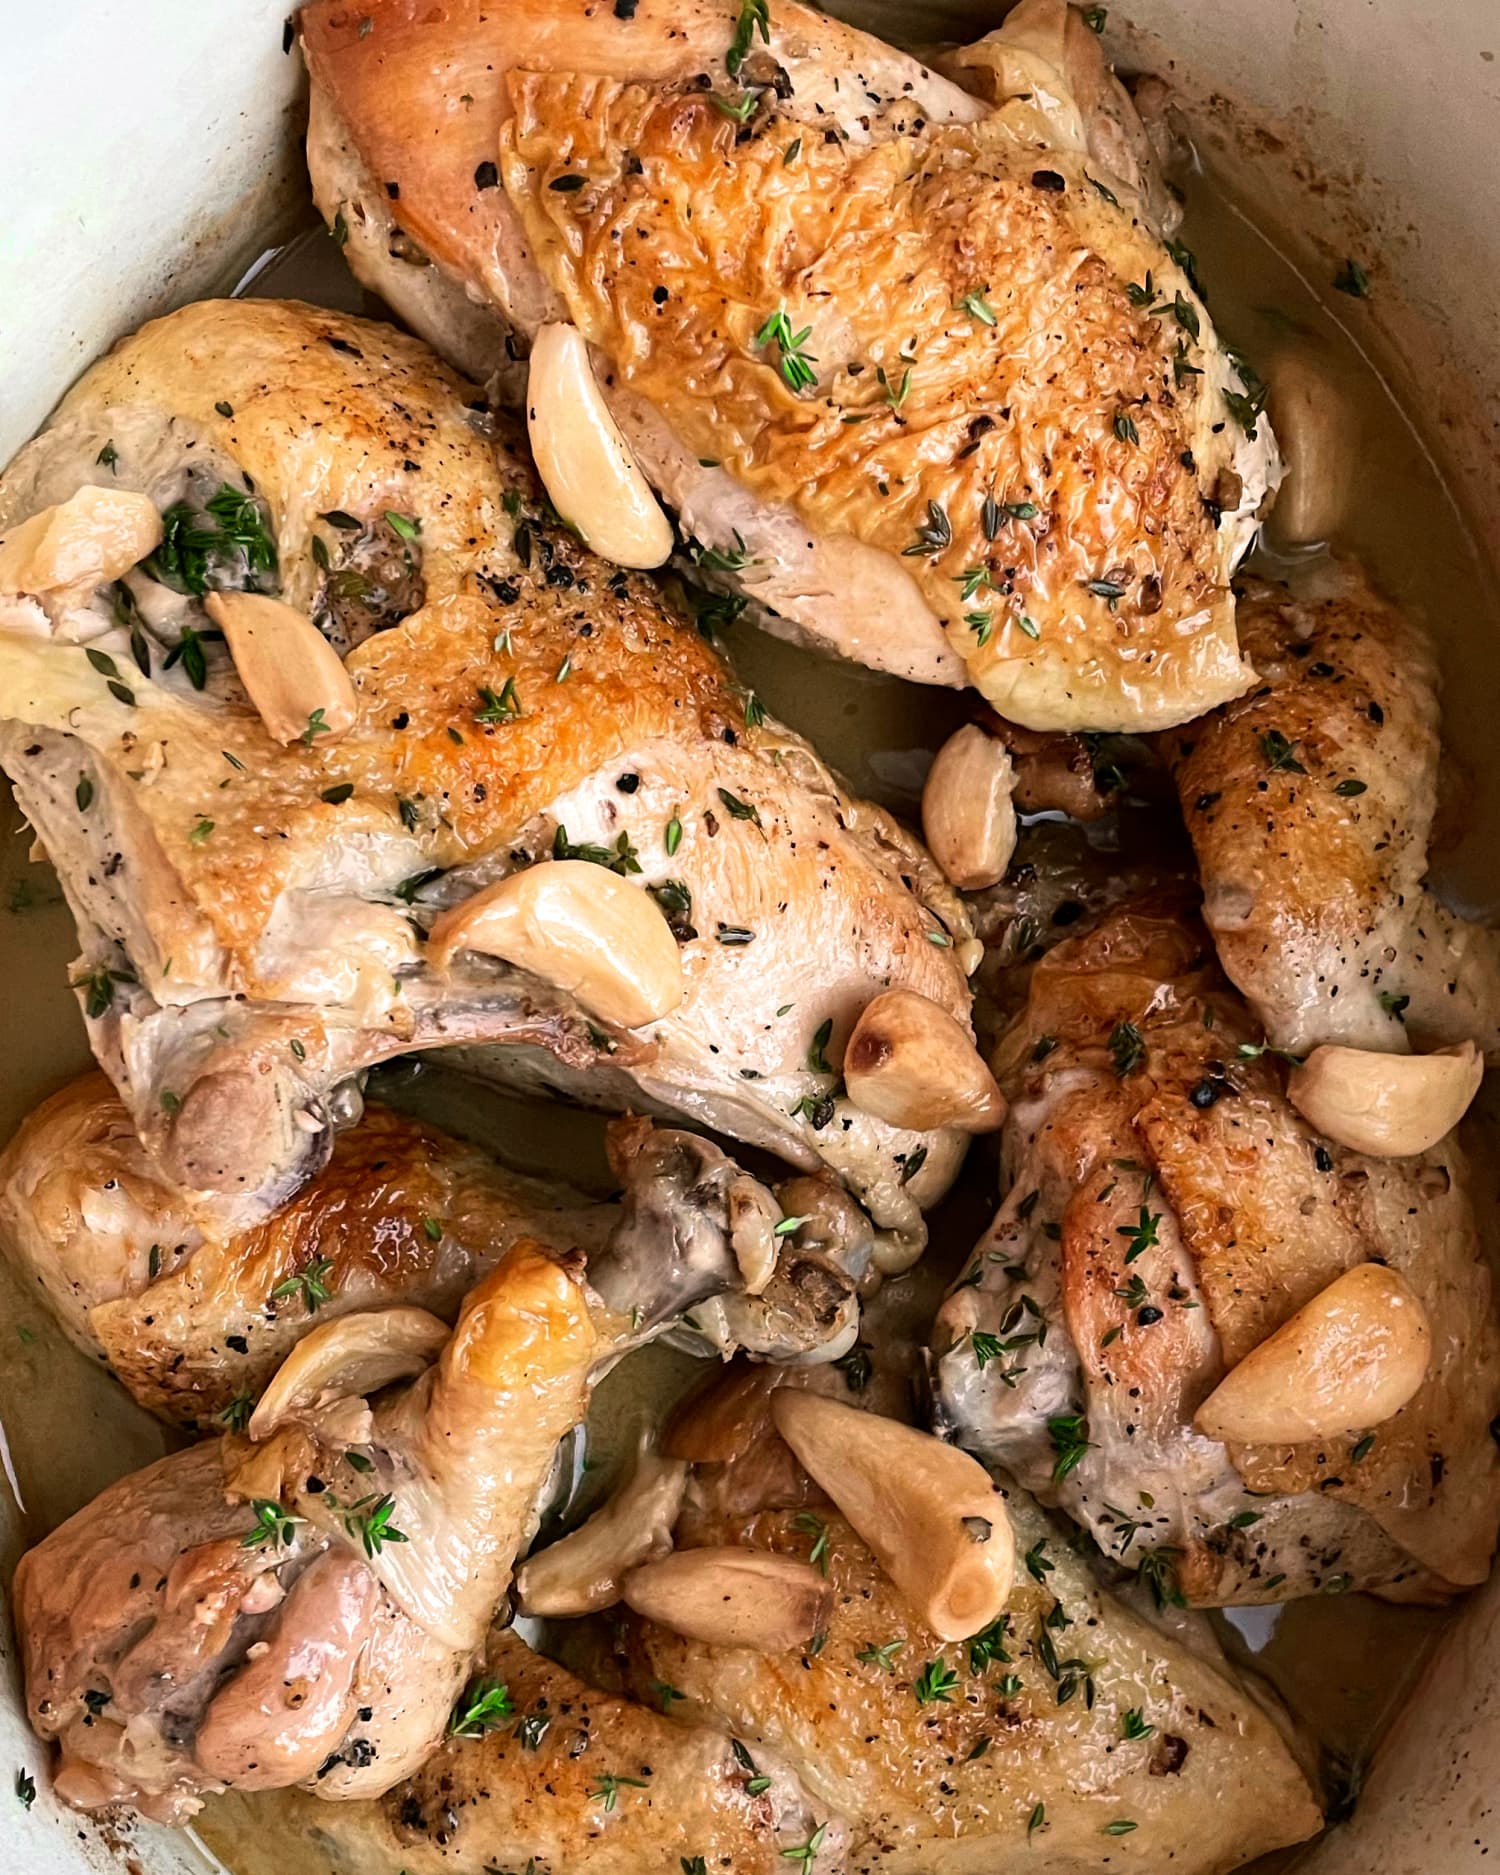 Ina Garten’s Chicken With 40 Cloves of Garlic Has Hundreds of 5 Star Reviews — and I Get Why